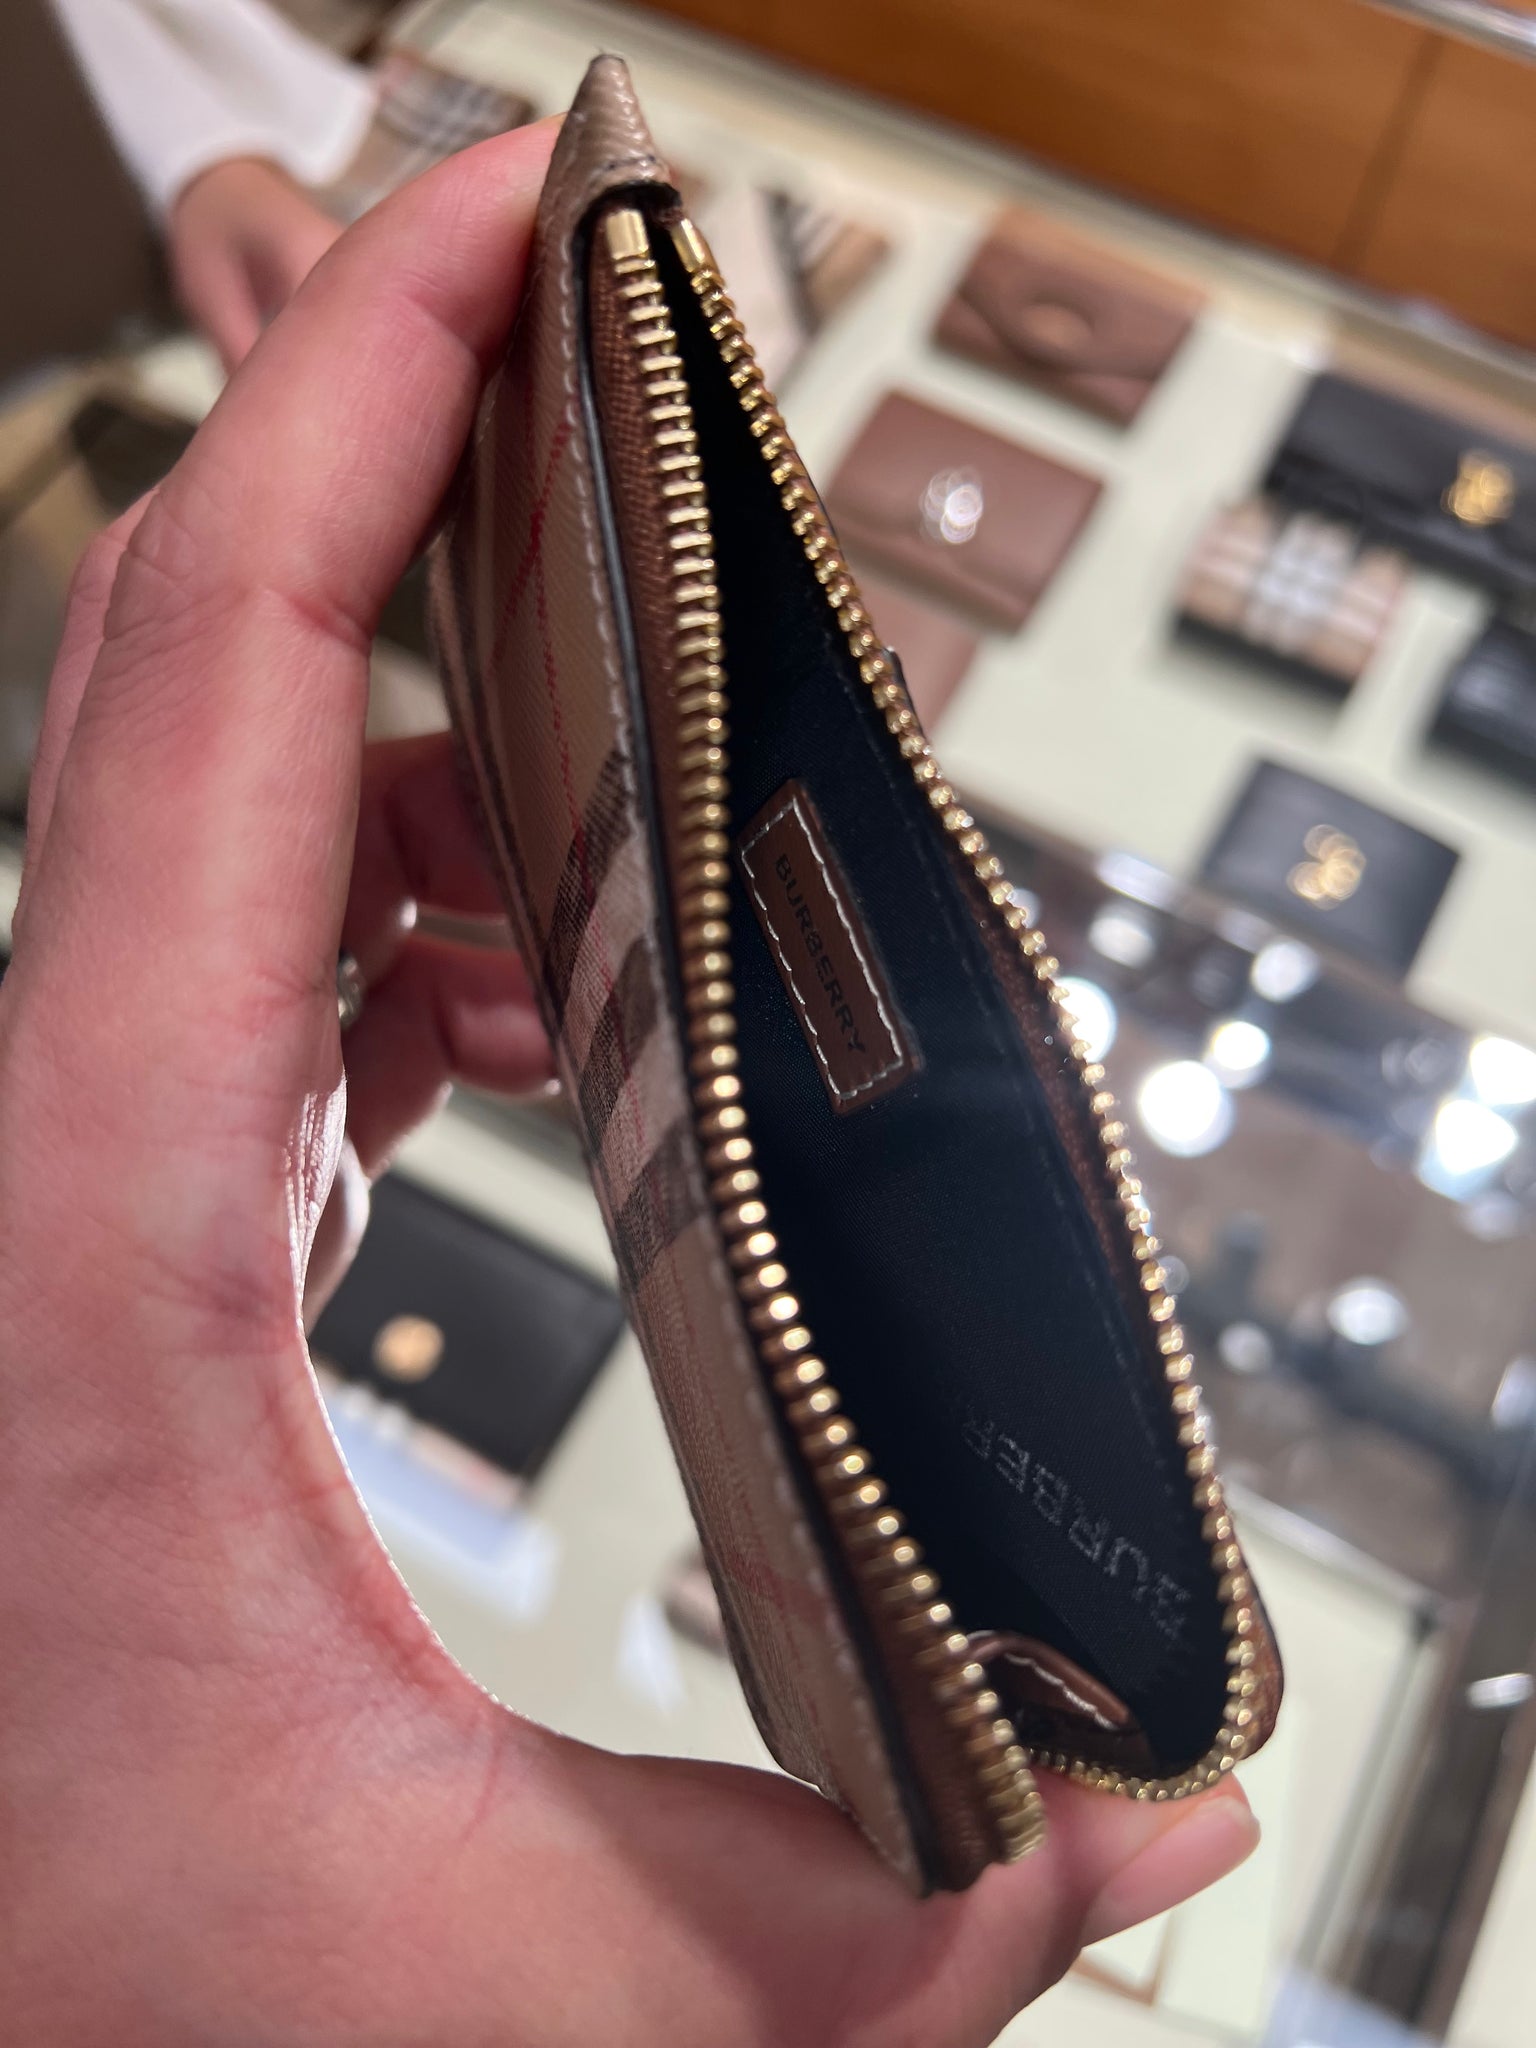 Burberry Card Wallet